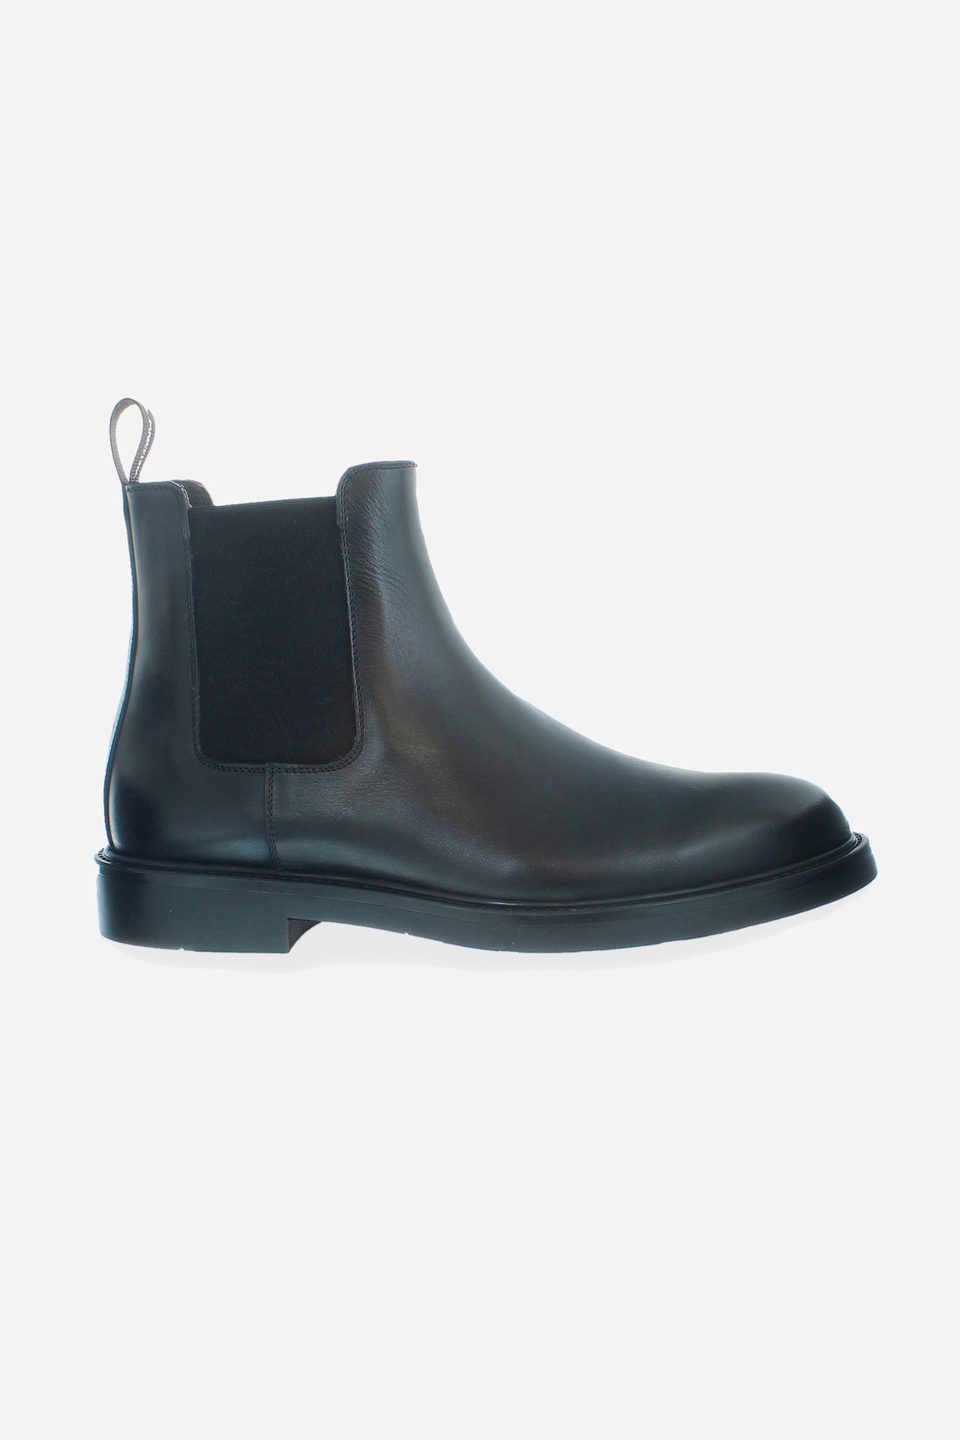 Men’s ankle boot in buttero leather | La Martina - Official Online Shop